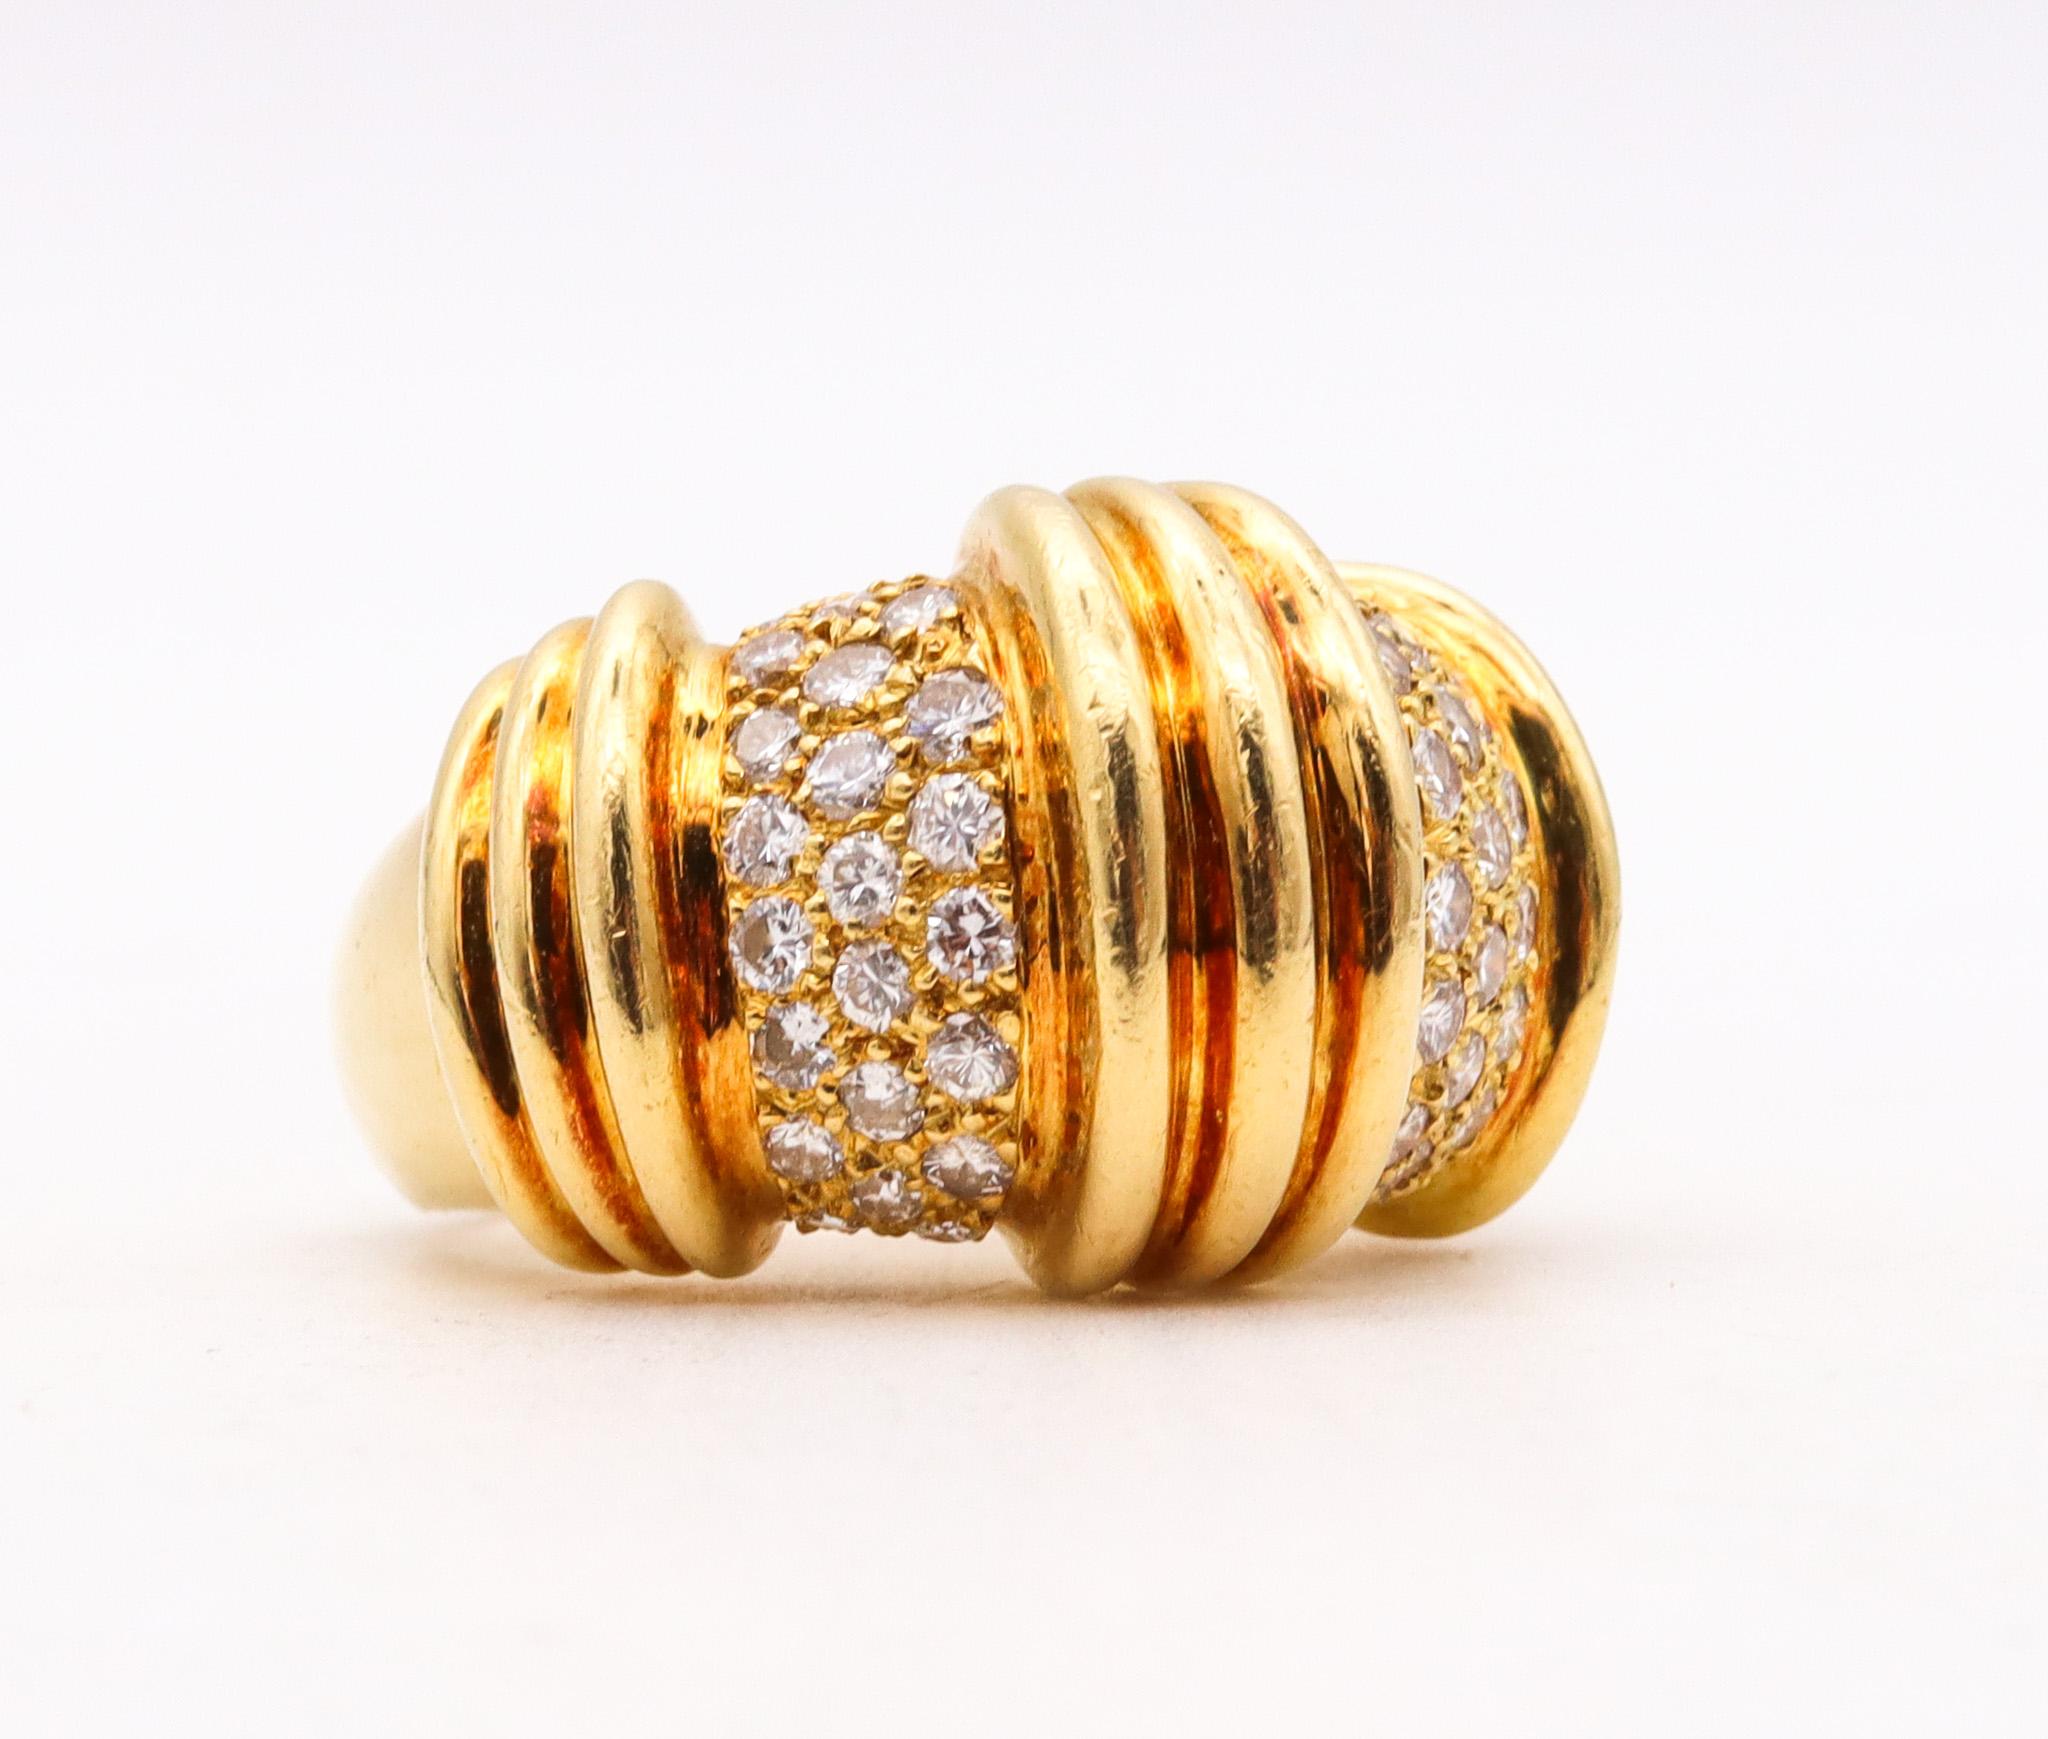 Cocktail ring designed by Charles Krypell.

Beautiful contemporary ring created by the iconic American designer Charles Krypell. This cocktail ring has been crafted with classical fluted patterns in solid yellow gold of 18 karats with high polished